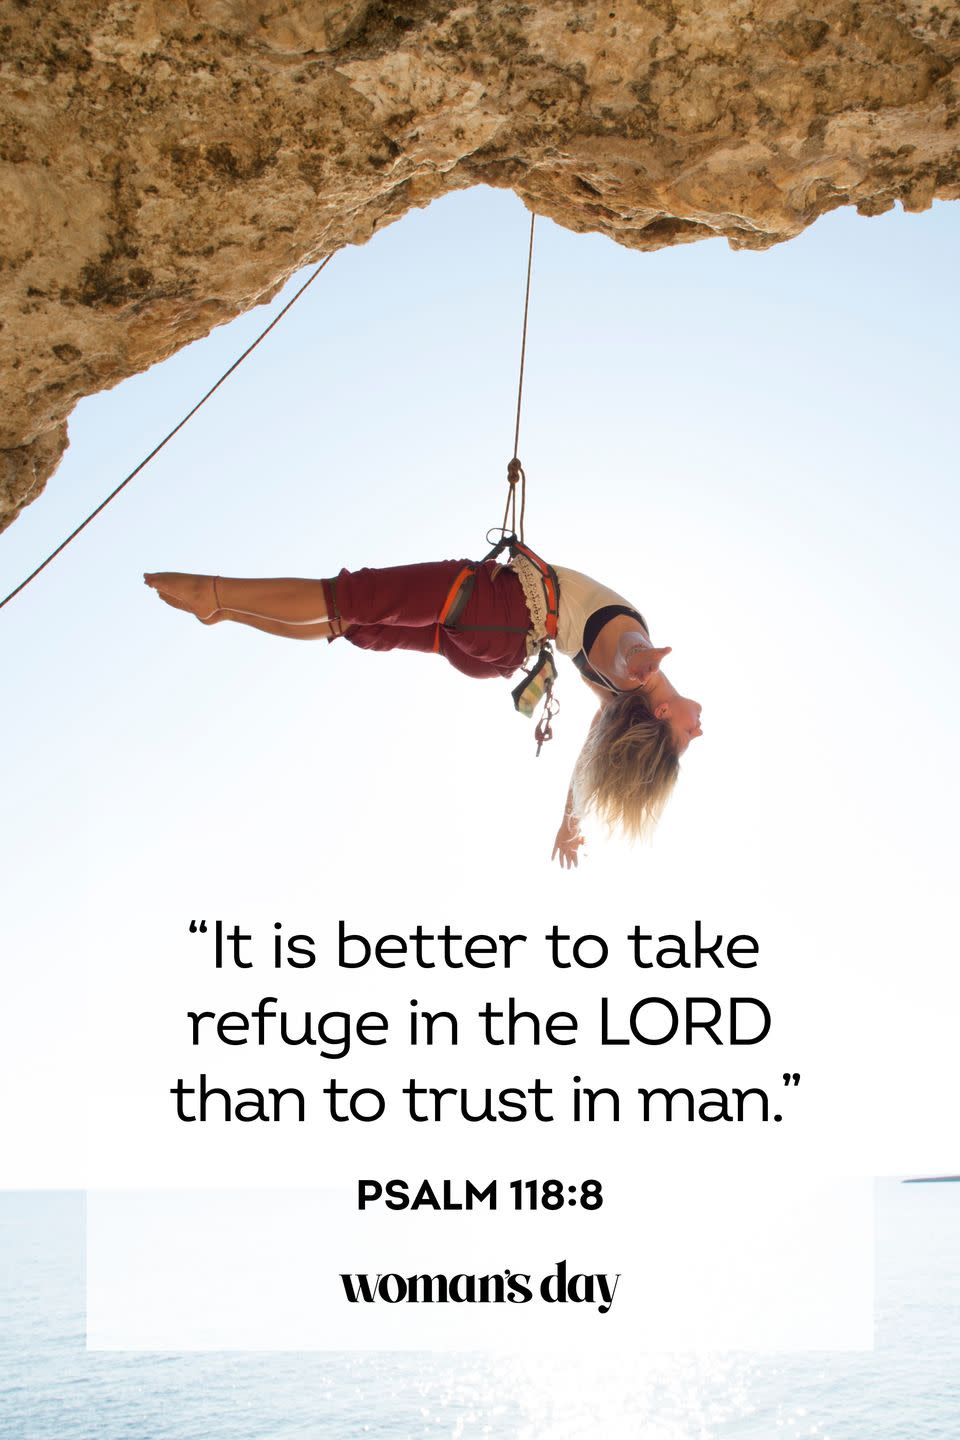 <p>“It is better to take refuge in the LORD than to trust in man.”</p><p><strong>The Good News: </strong>God’s trust does not waver, while a person's trust can, as we are only human.</p>